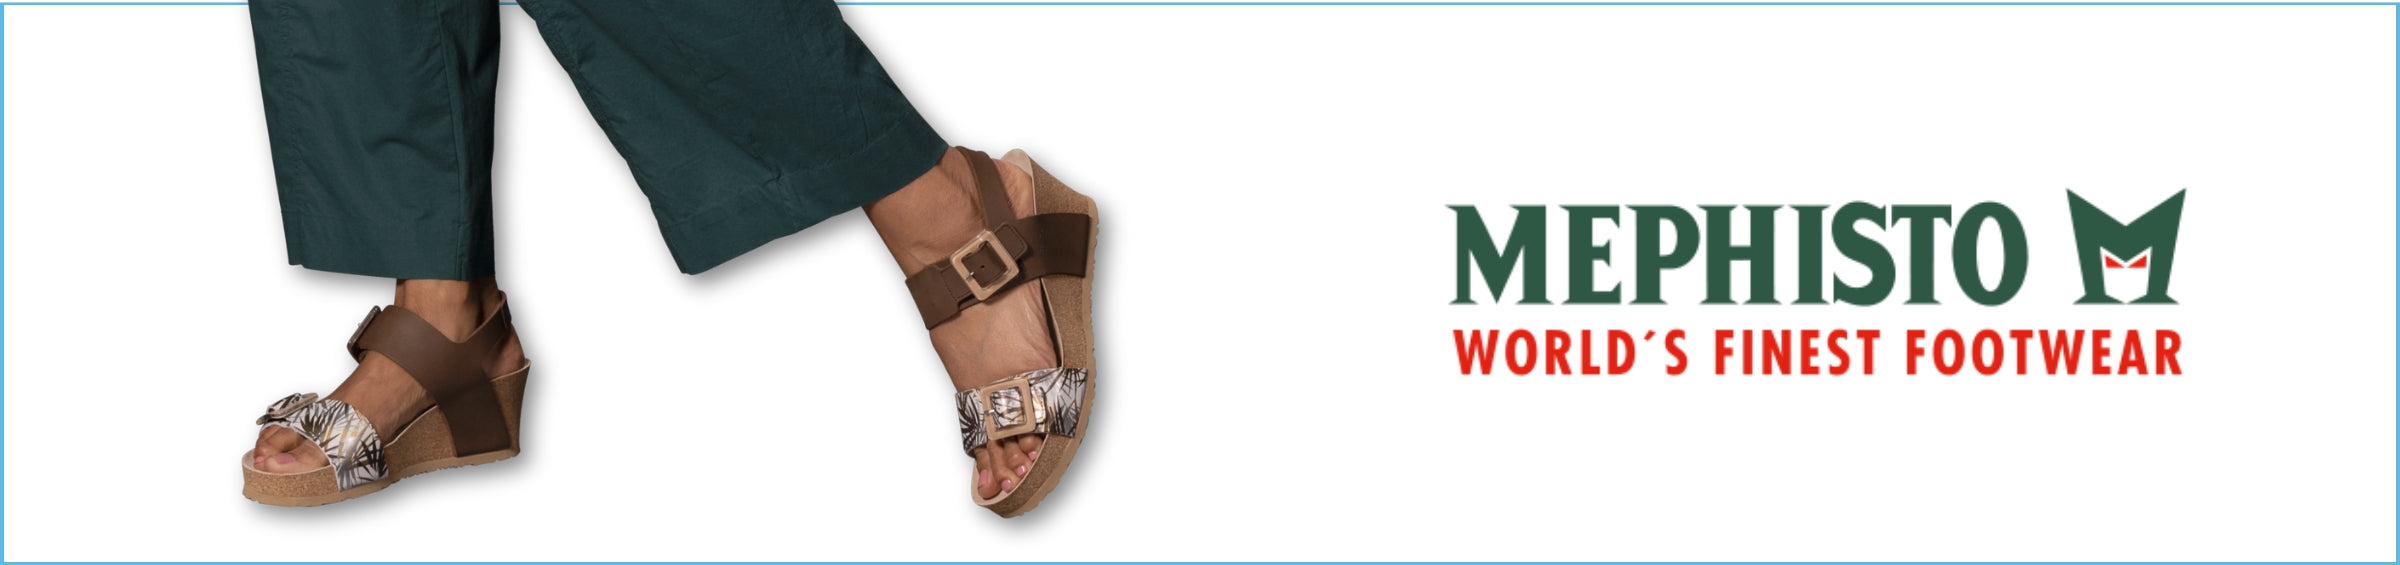 Mephisto Sandals & Shoes